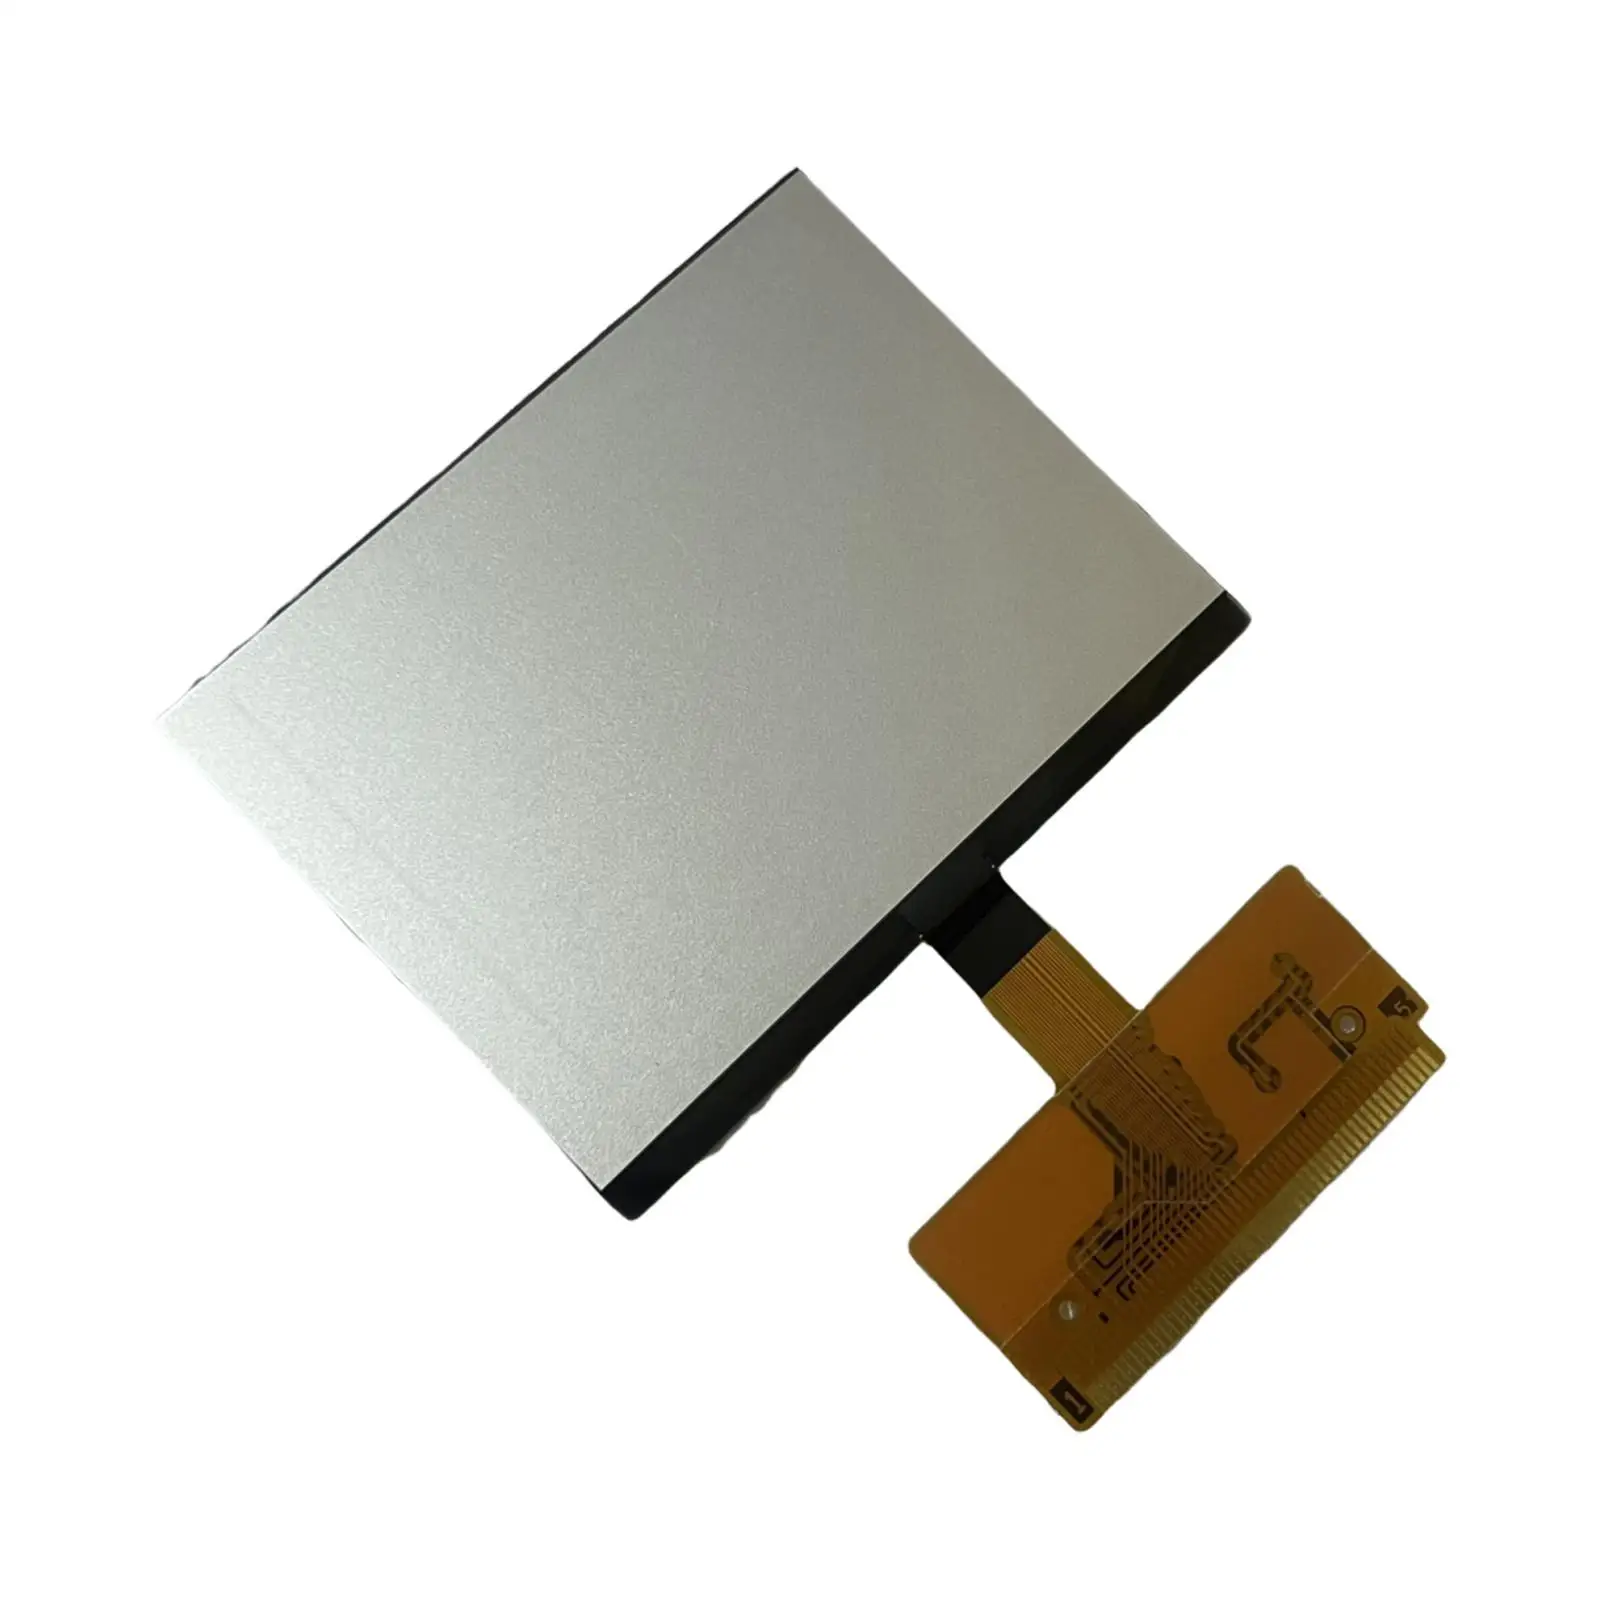 LCD Display Replacement Durable Vehicle Spare Parts for Audi A3 A4 A6 S4 B5 7.5cmx5.7cm Good Performance Easily Install